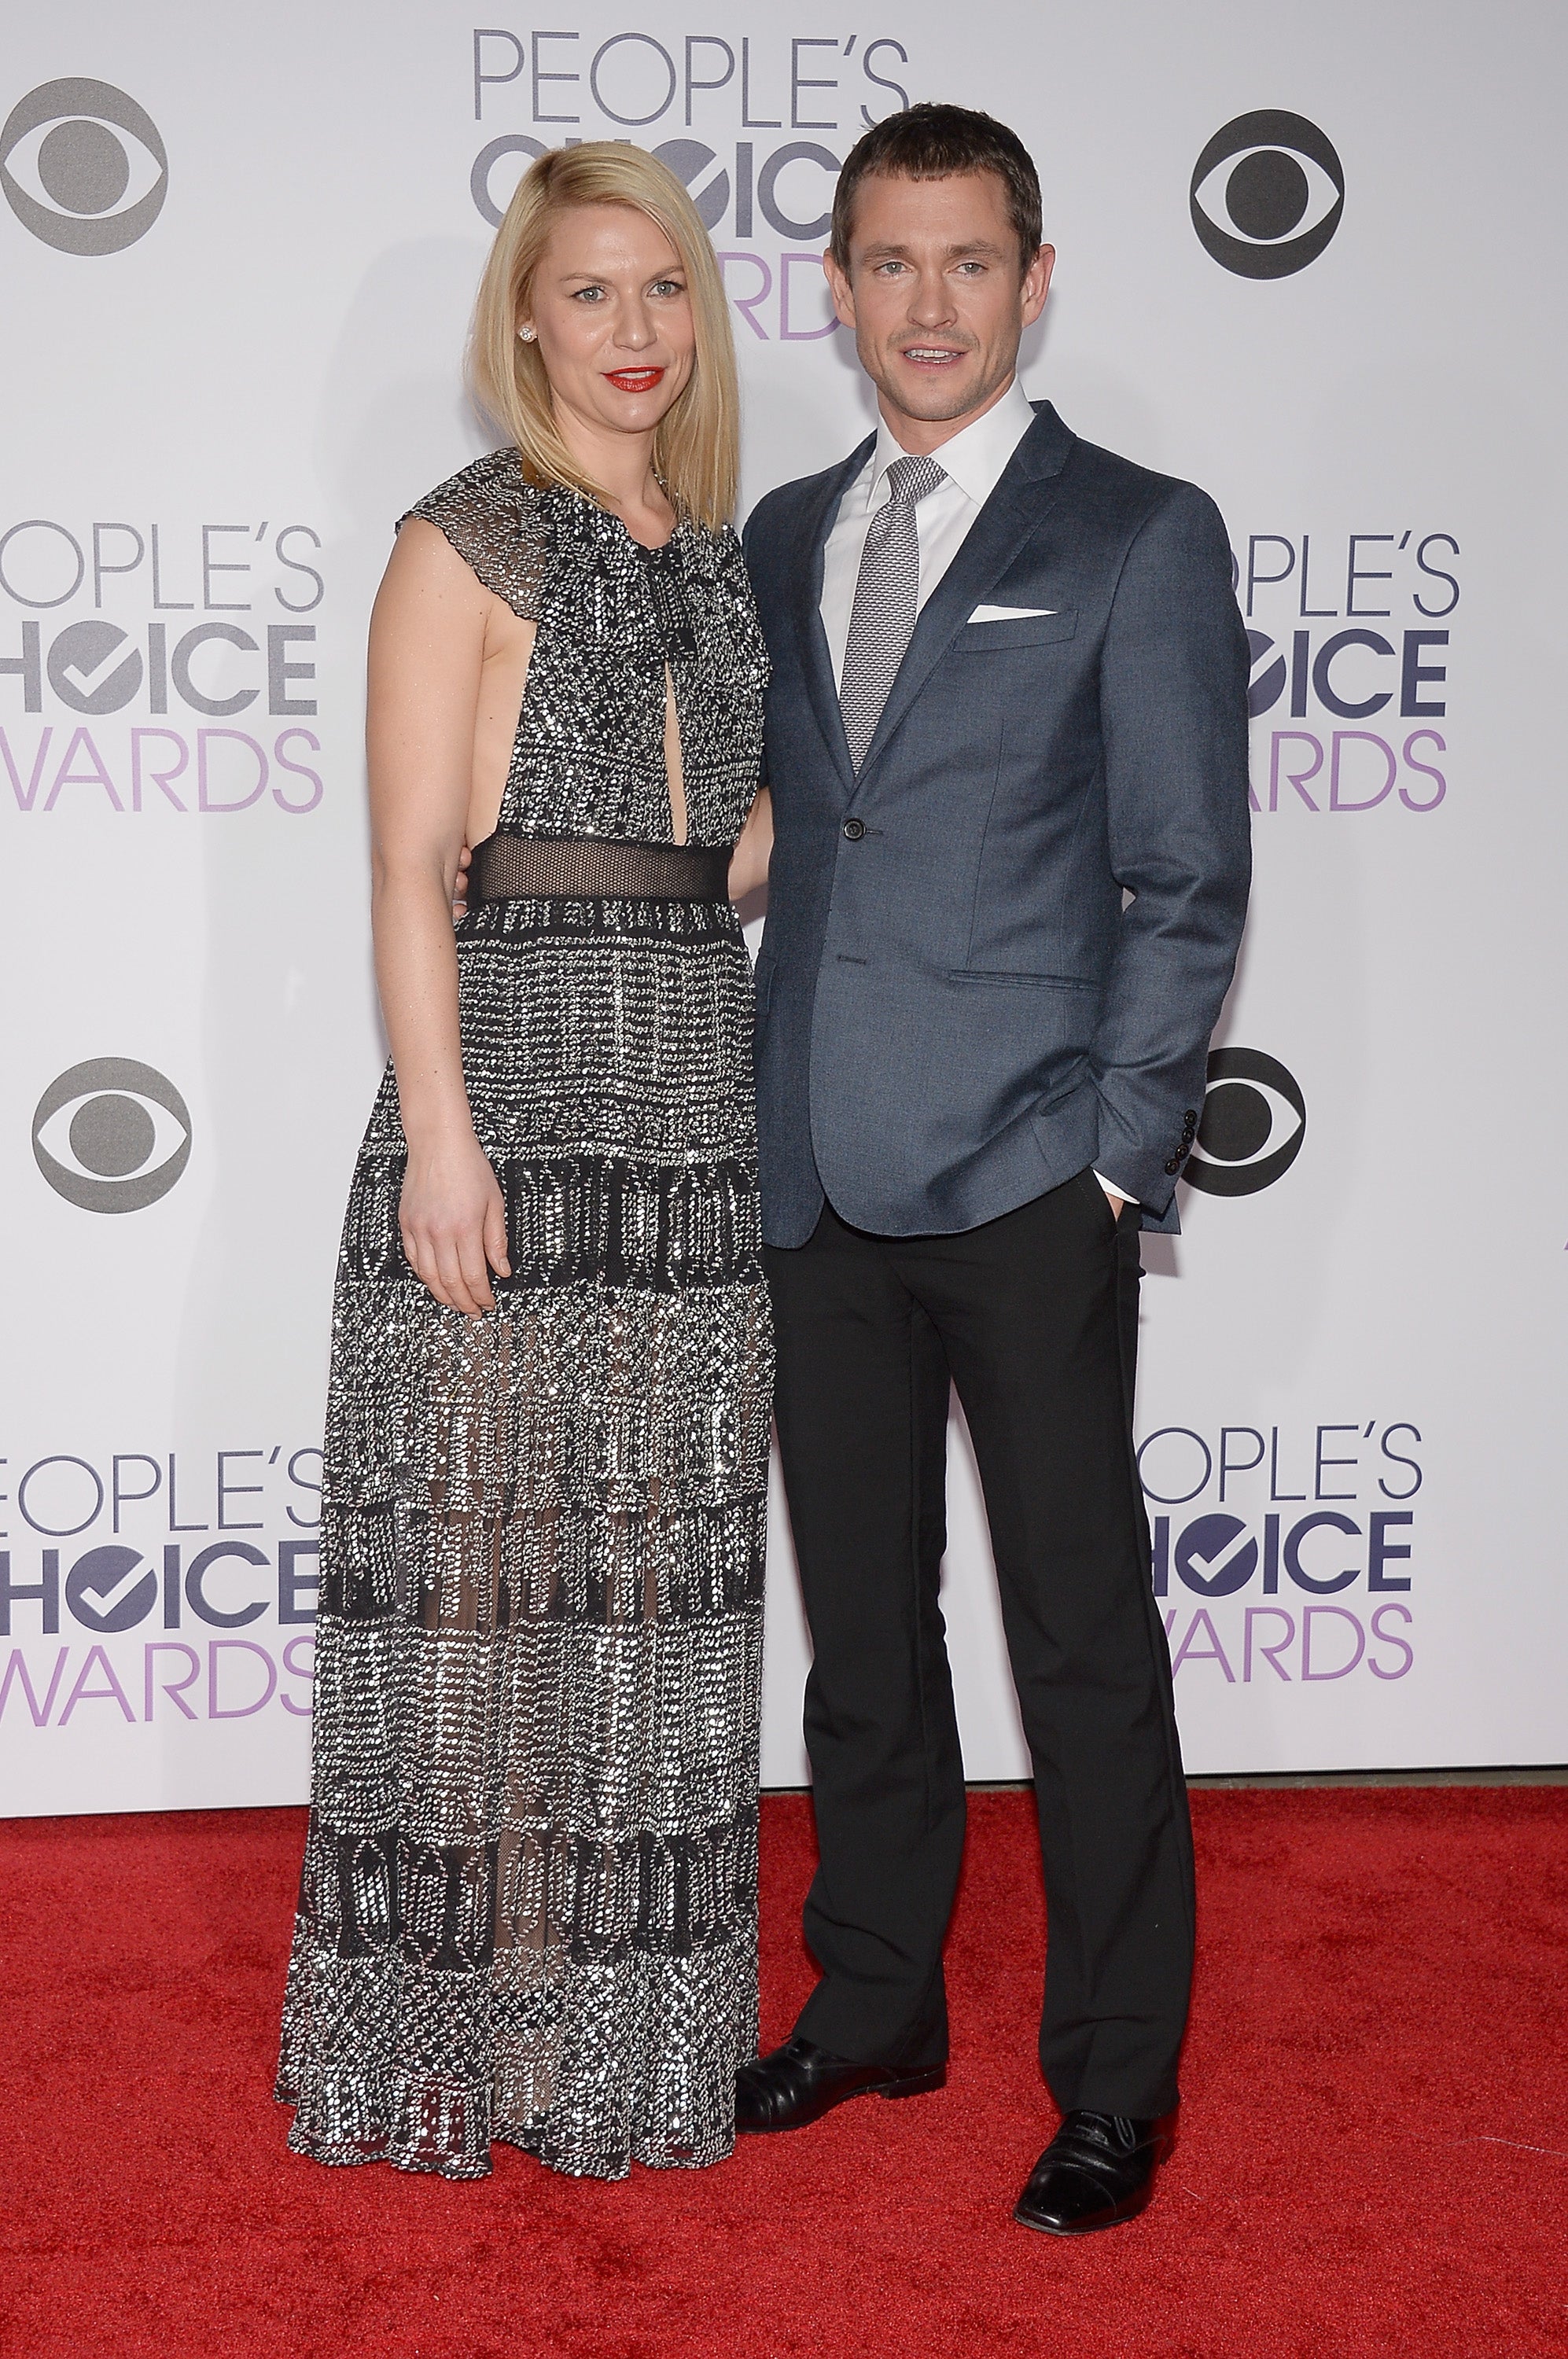 Claire Danes expecting second child with husband Hugh Dancy – New